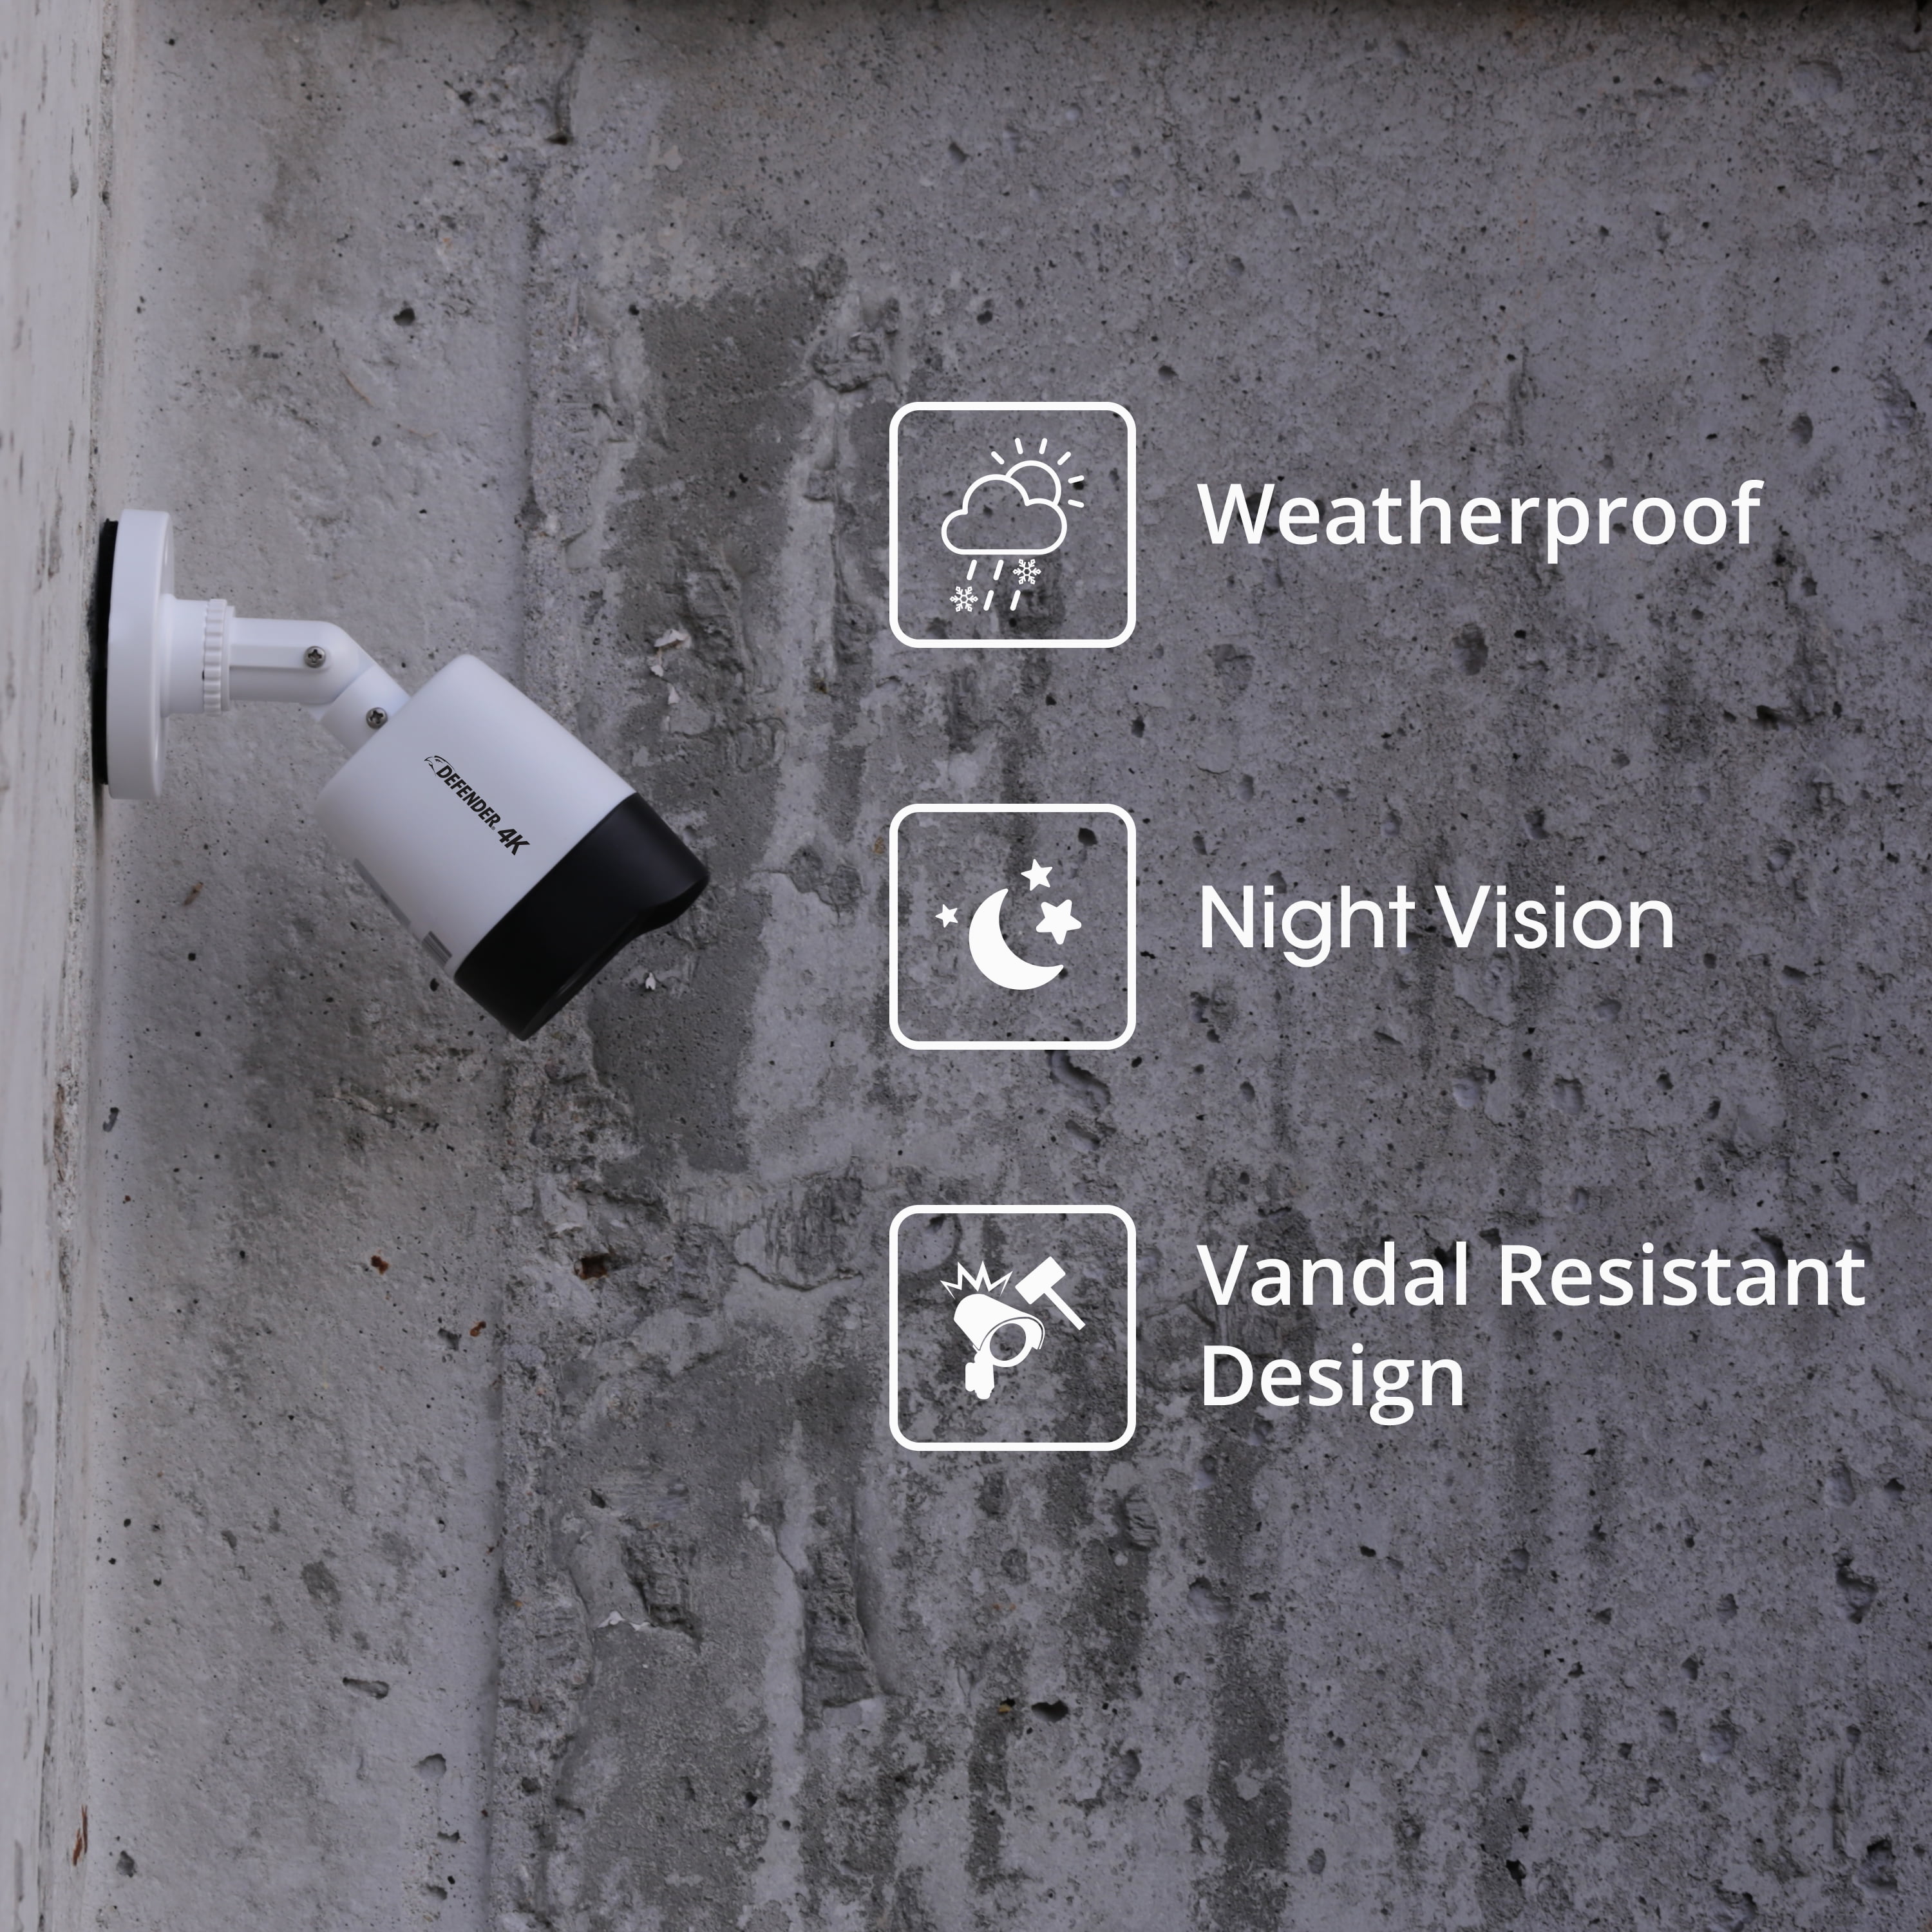 defender wired security system